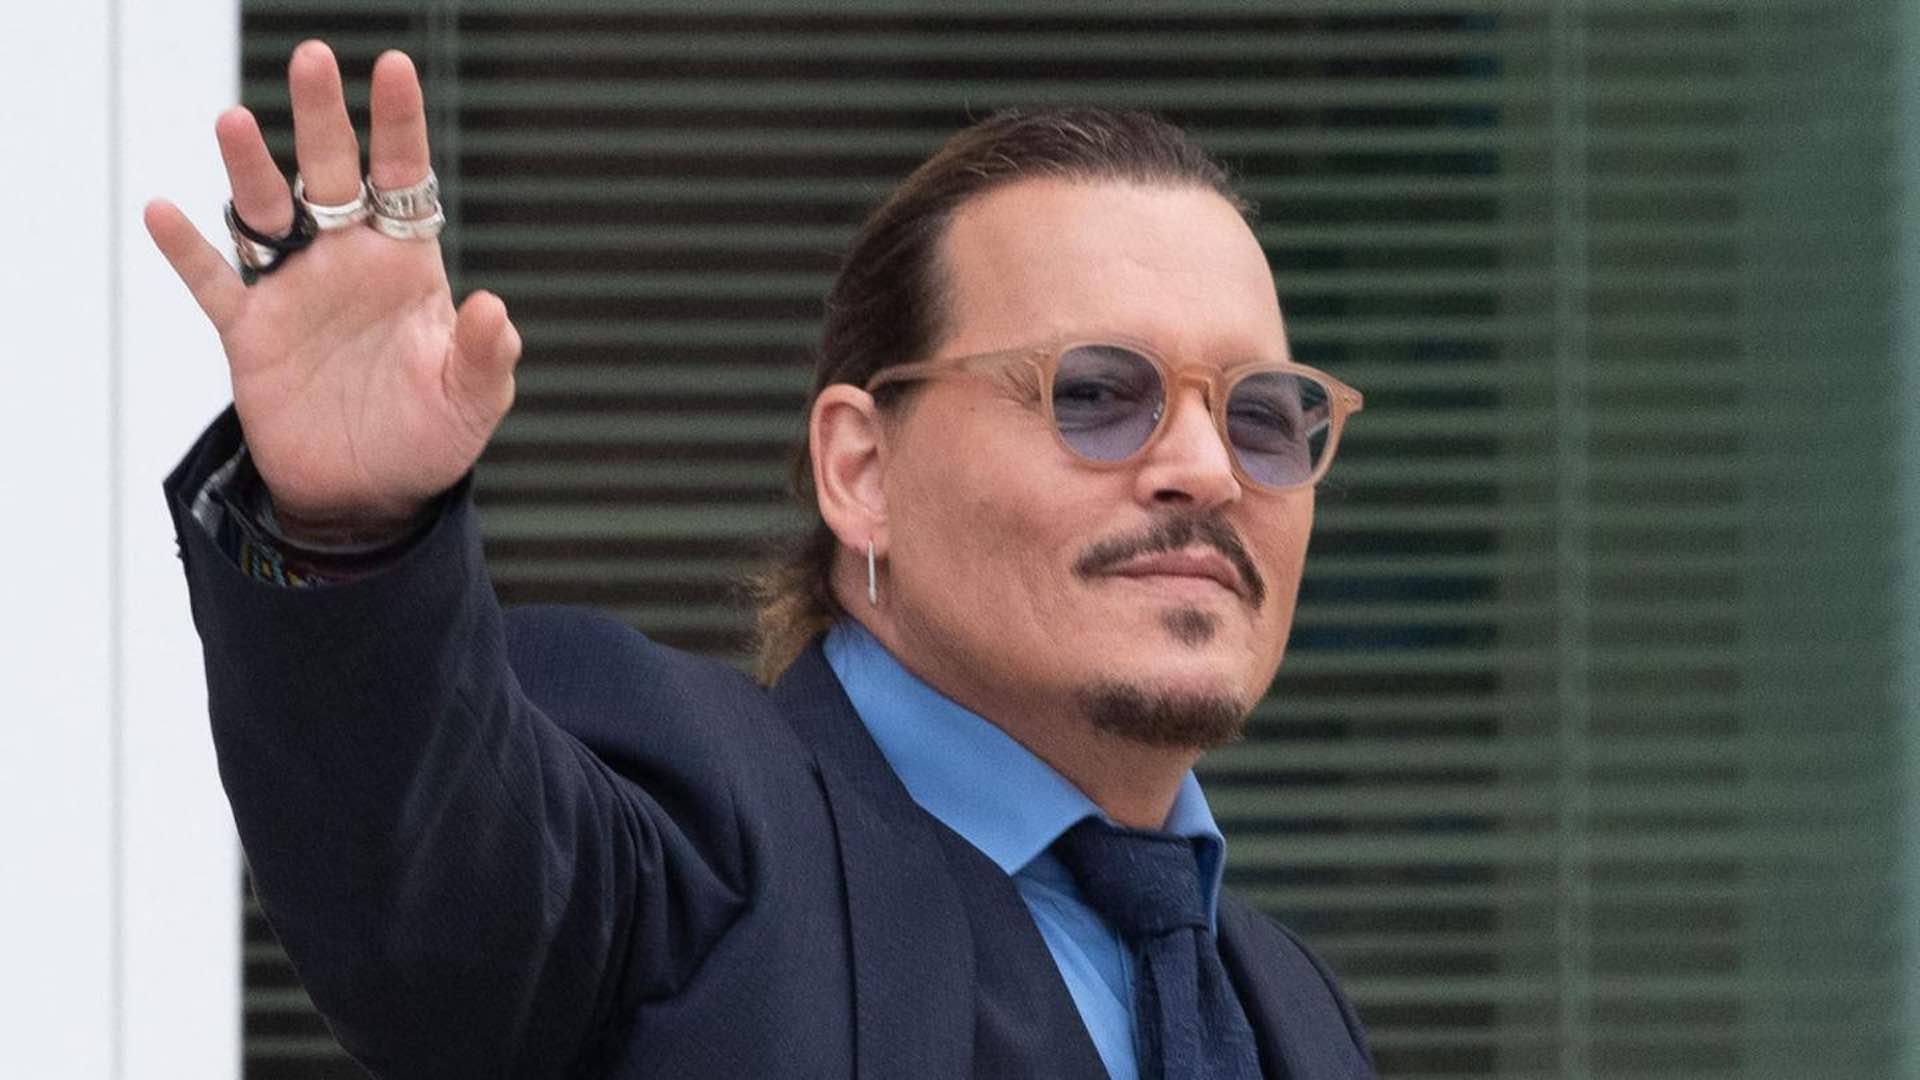 Johnny Depp donates $8 million to charity from the sale of NFTs